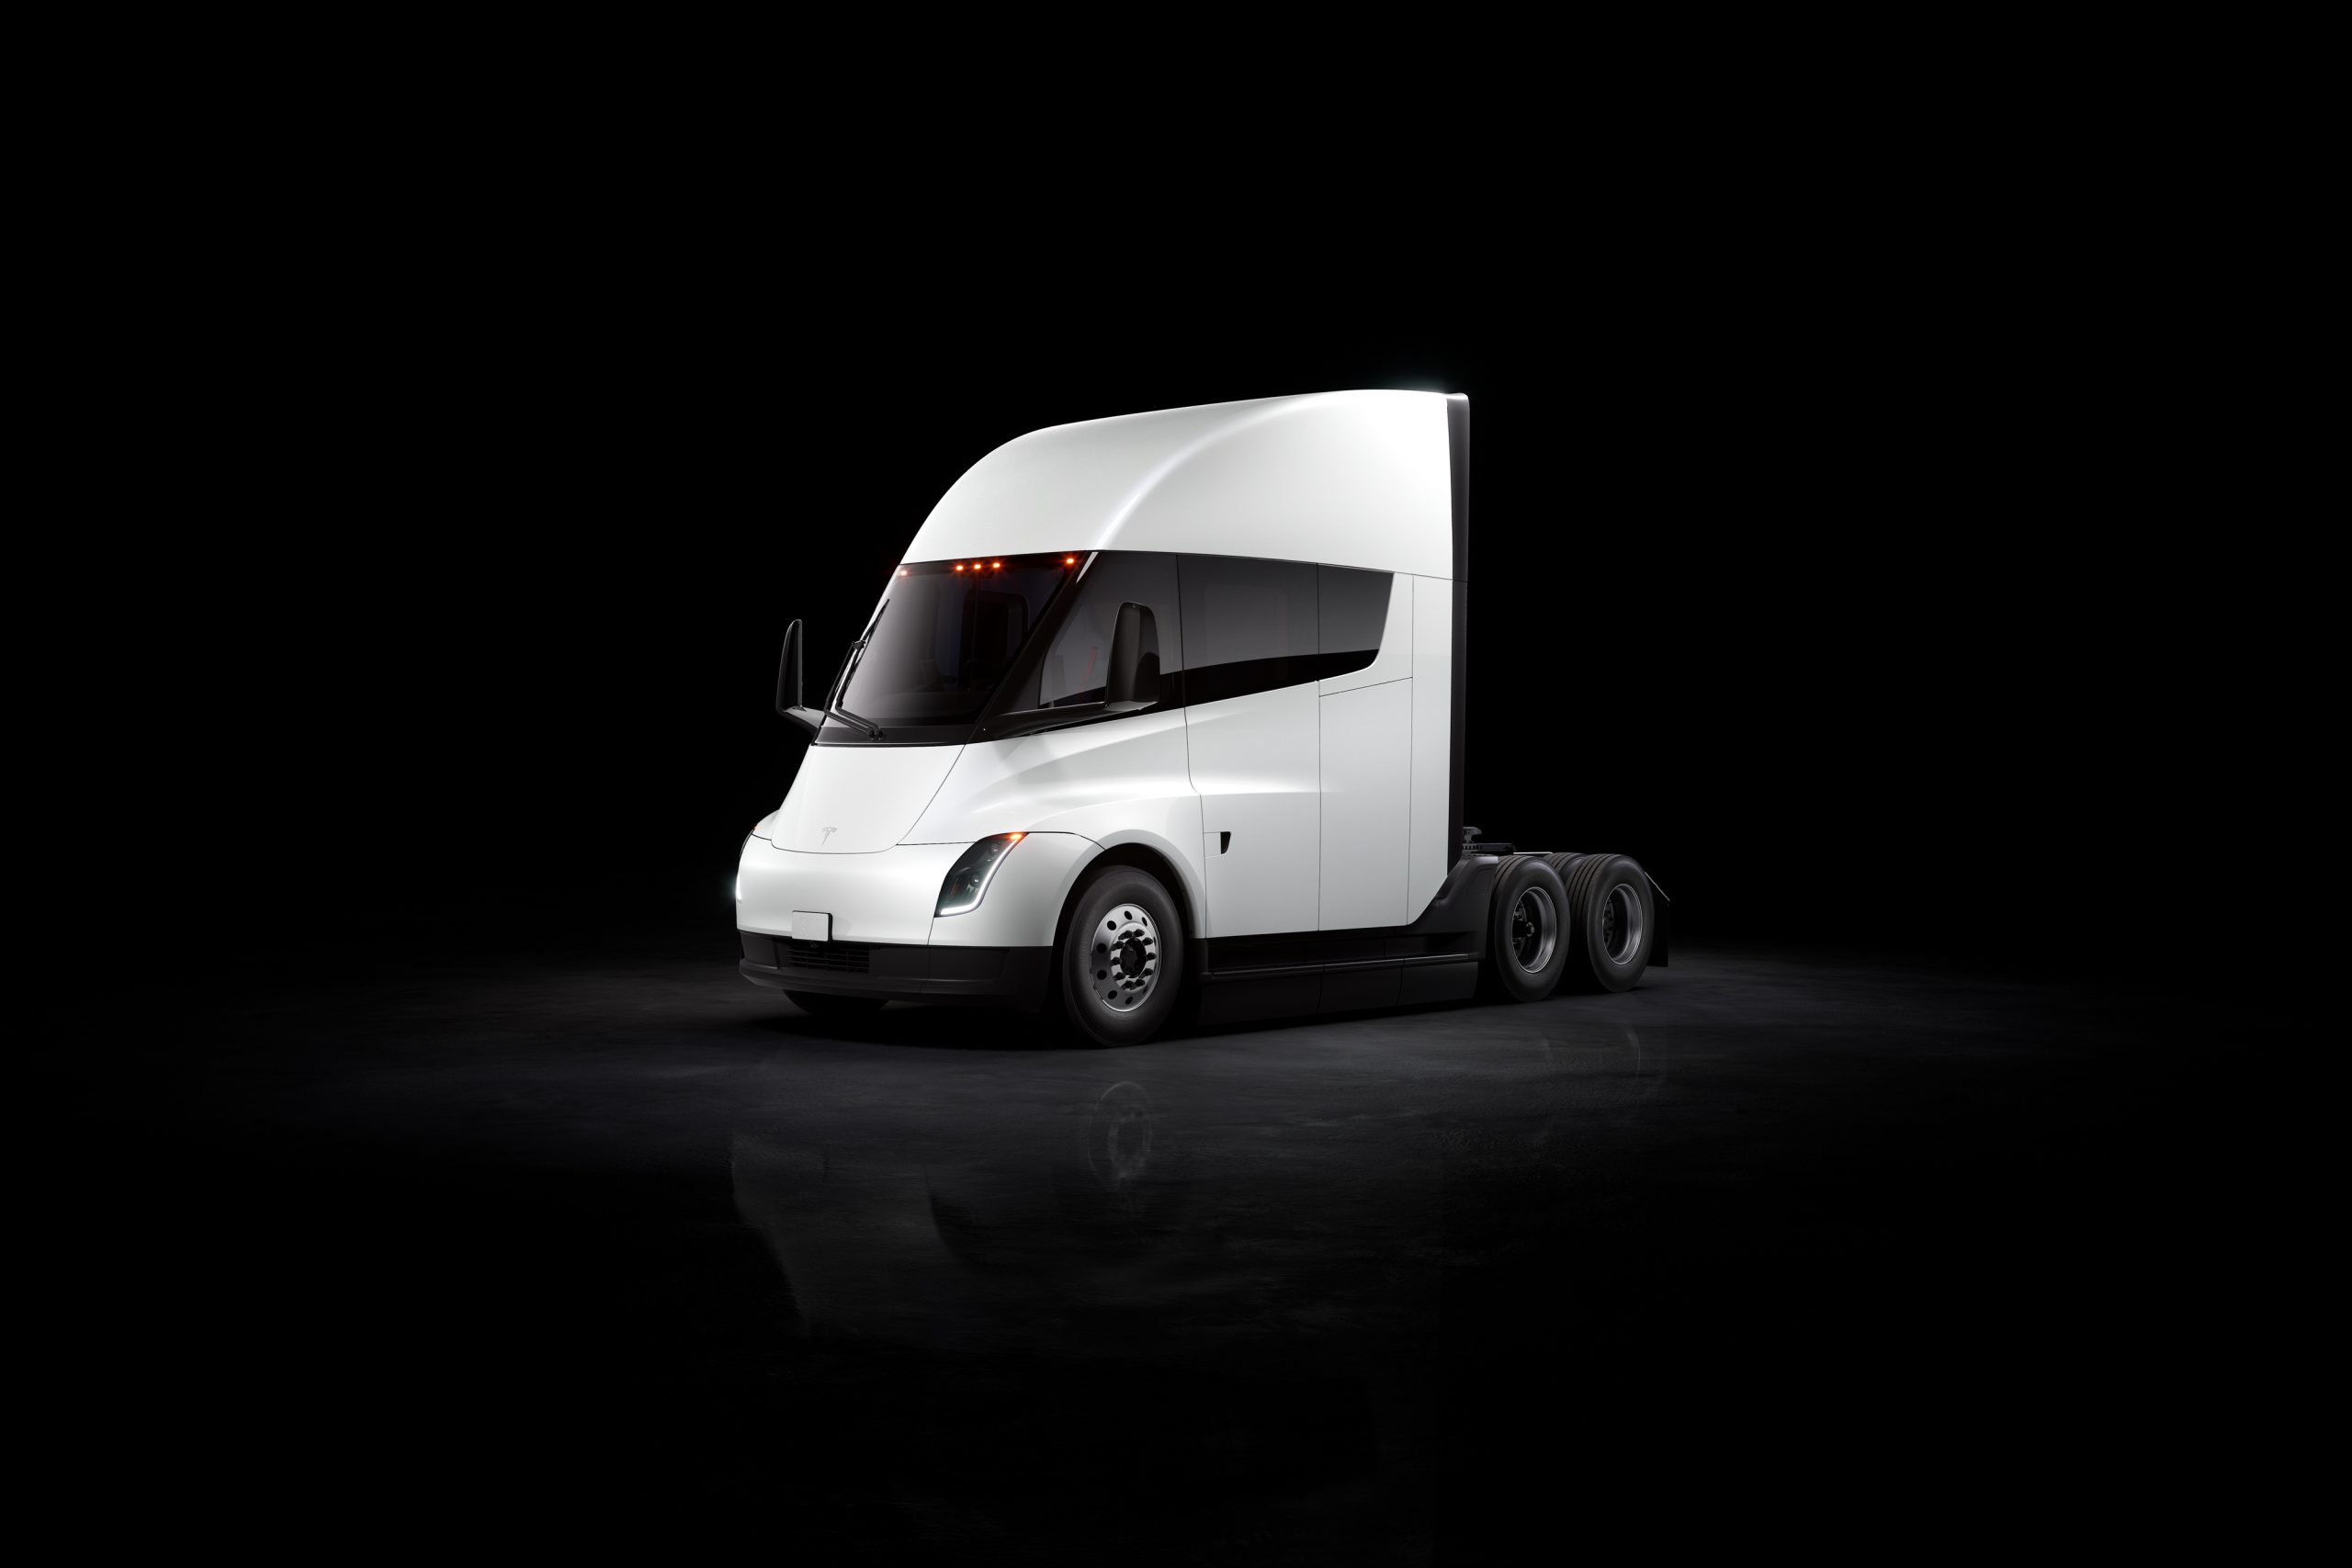 Tesla shares new photos of the Tesla Semi. Delivery soon?